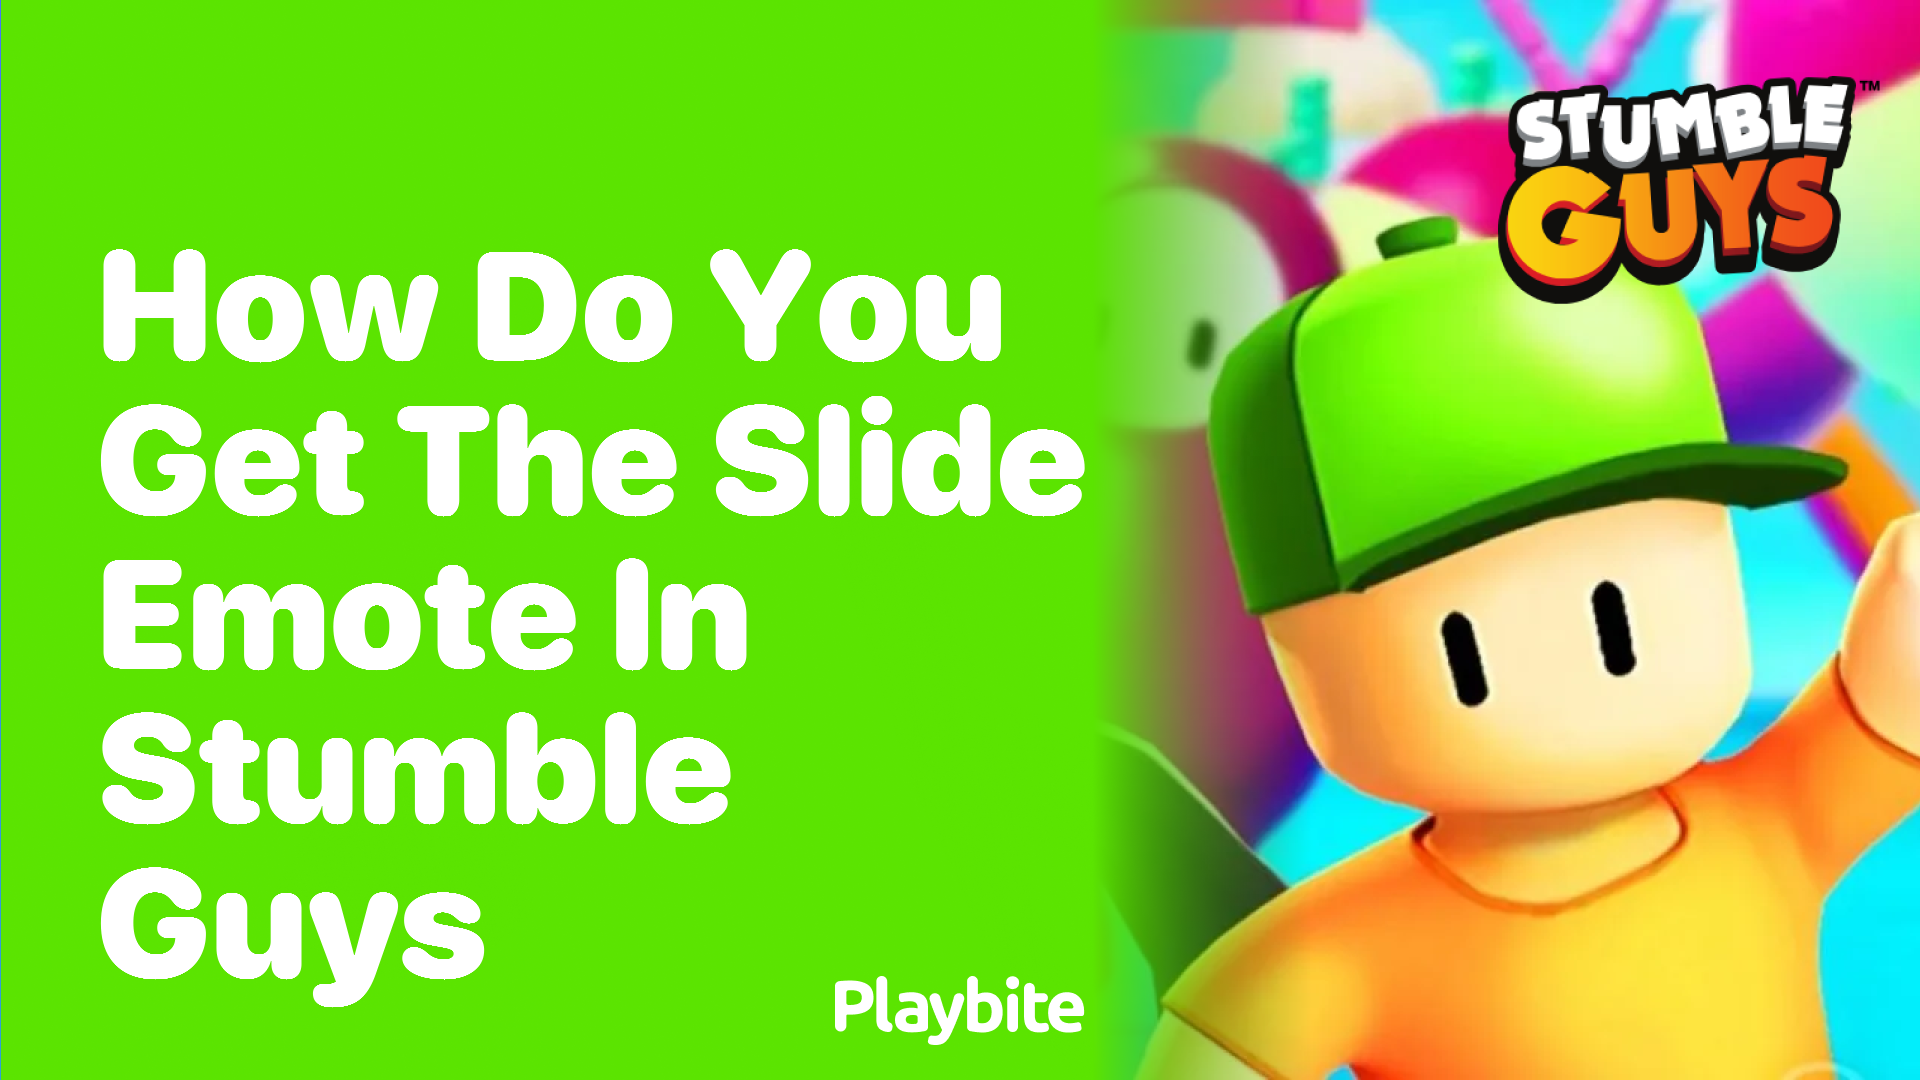 How Do You Get the Slide Emote in Stumble Guys?